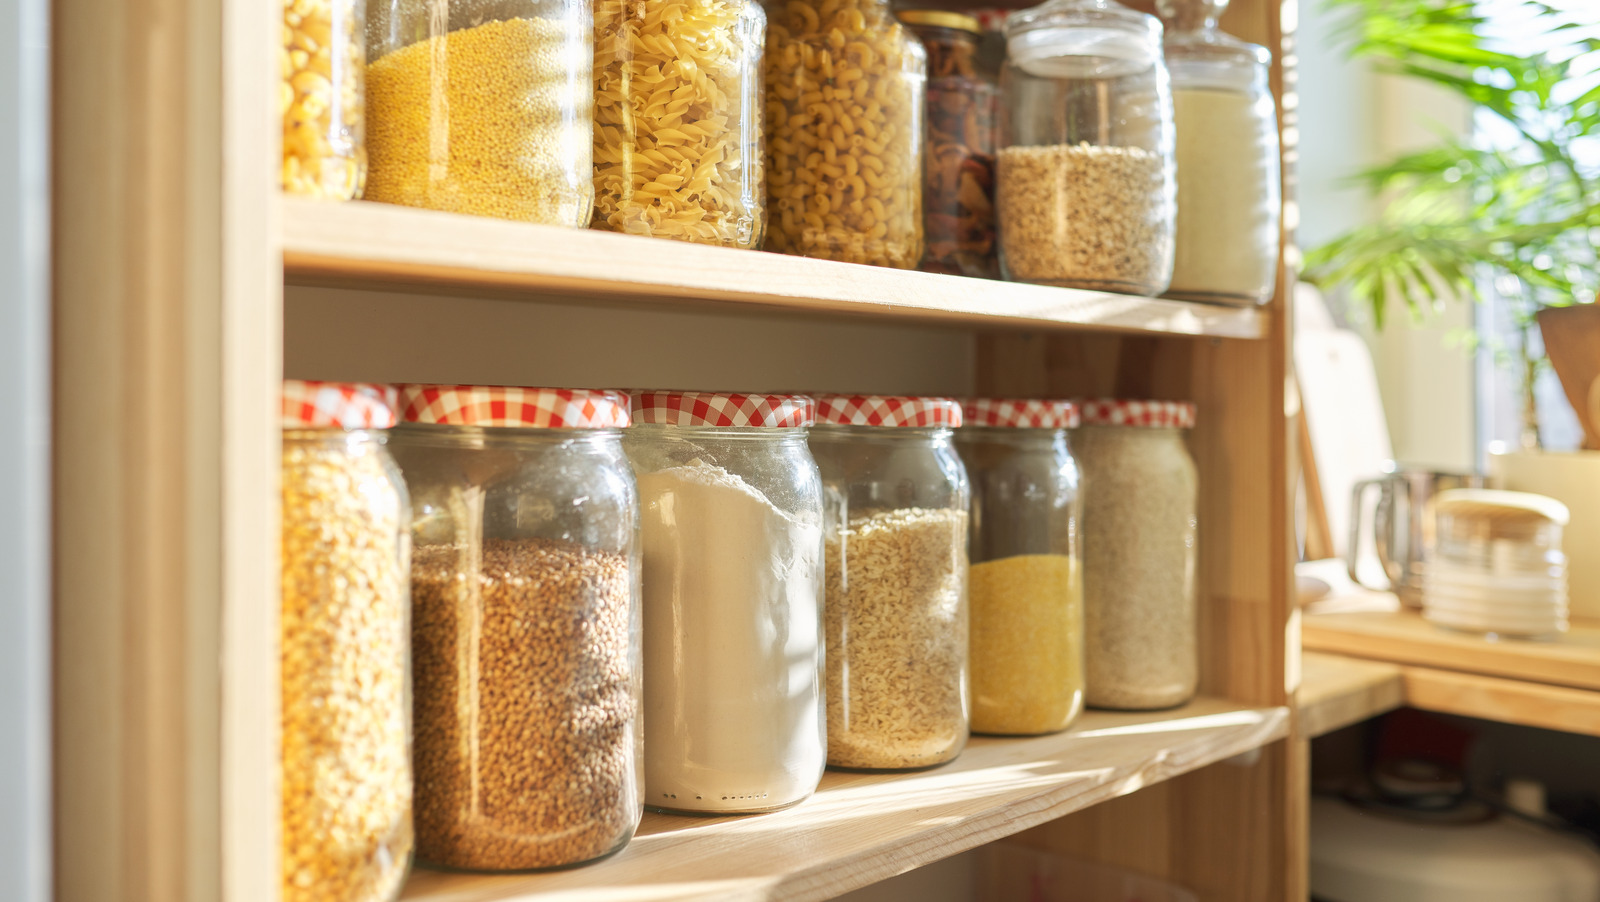 https://www.mashed.com/img/gallery/kitchen-organizers-your-pantry-needs-right-now/l-intro-1638824115.jpg